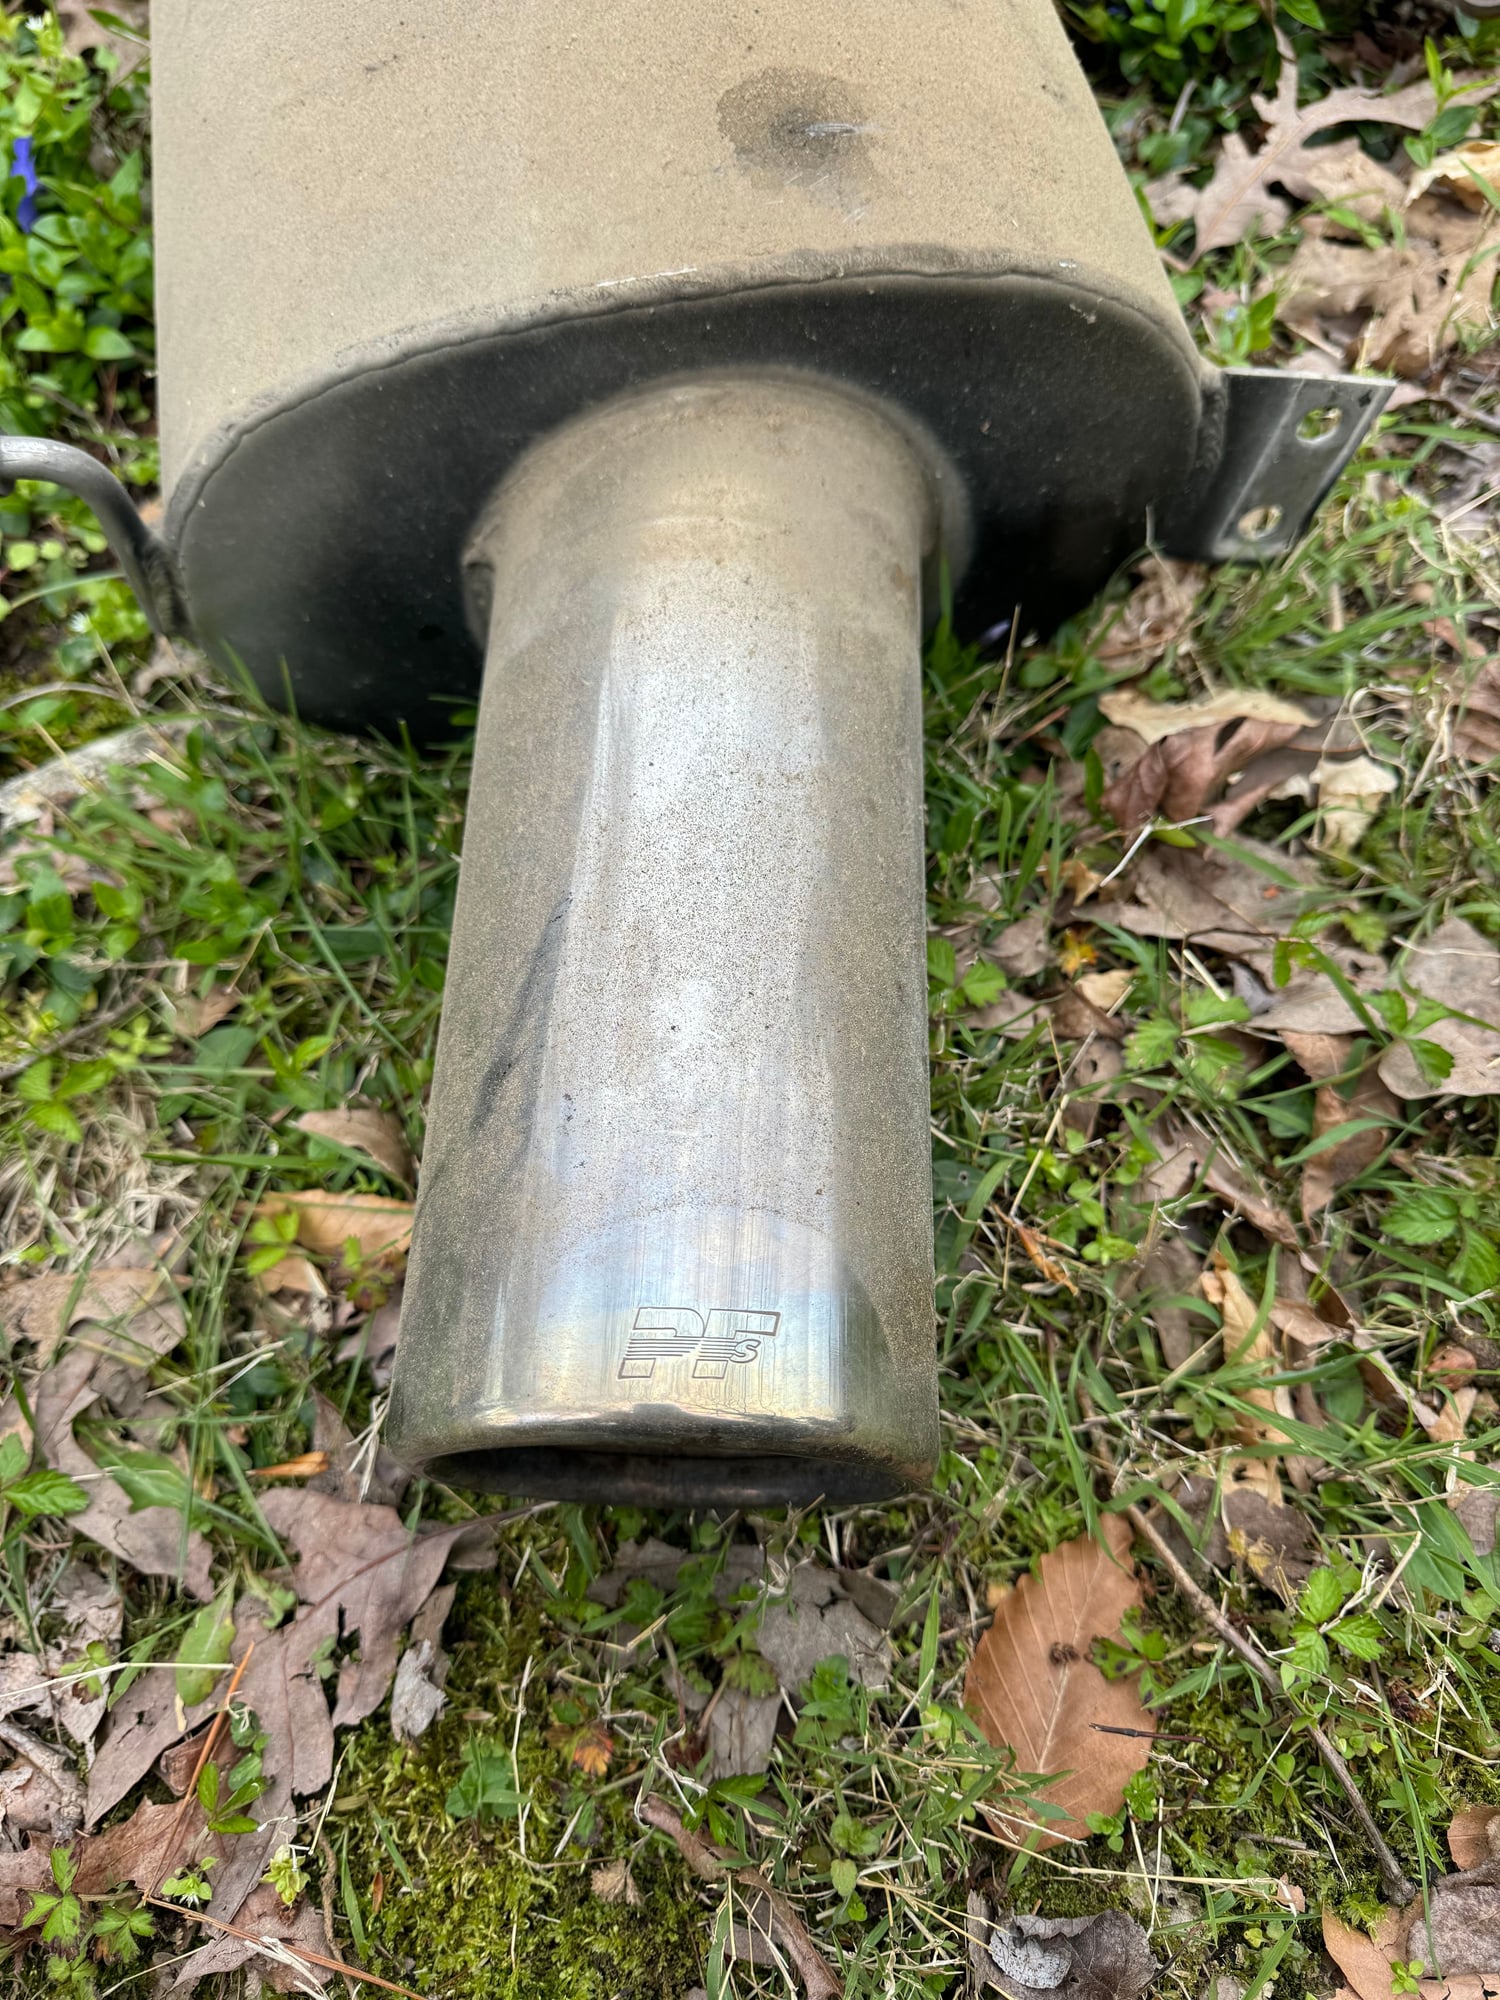 Engine - Exhaust - PFS exhaust plus down pipe and cat (not PFS) - Used - 1993 to 1996 Mazda RX-7 - Leonardtown, MD 20650, United States